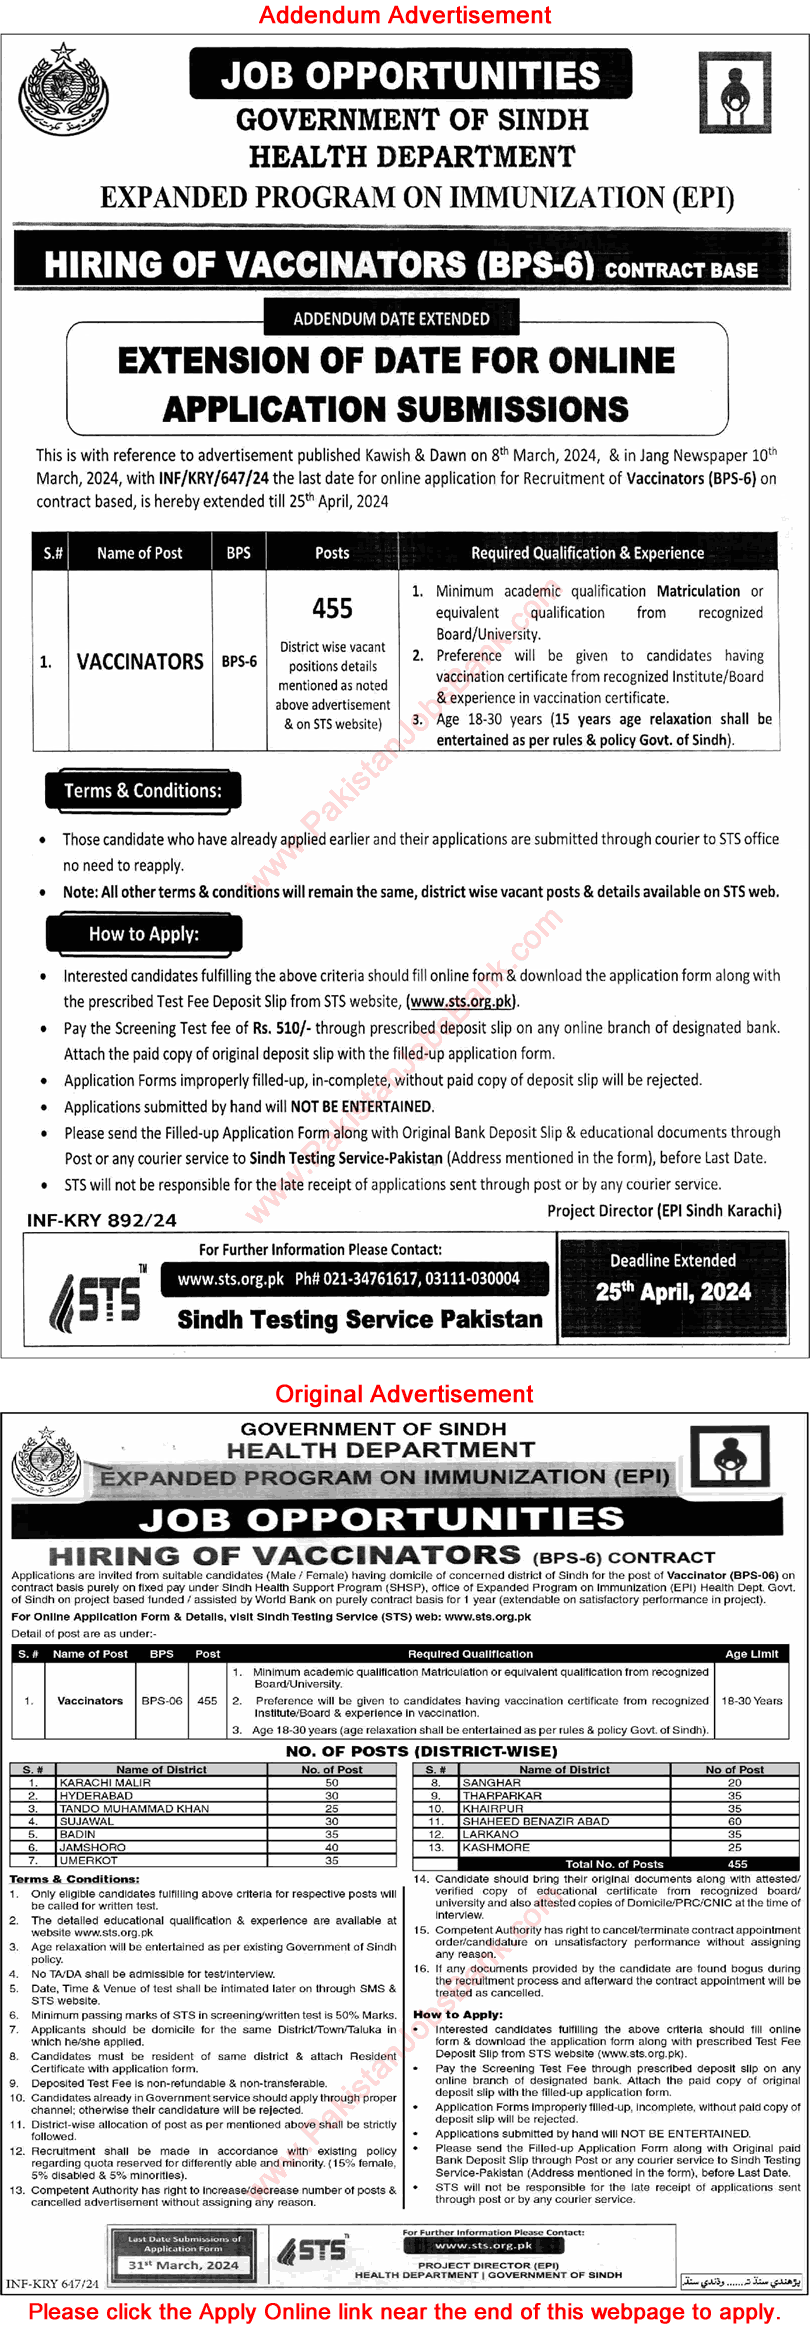 Vaccinator Jobs in Health Department Sindh March 2024 April STS Apply Online Expanded Program on Immunization (EPI) Latest